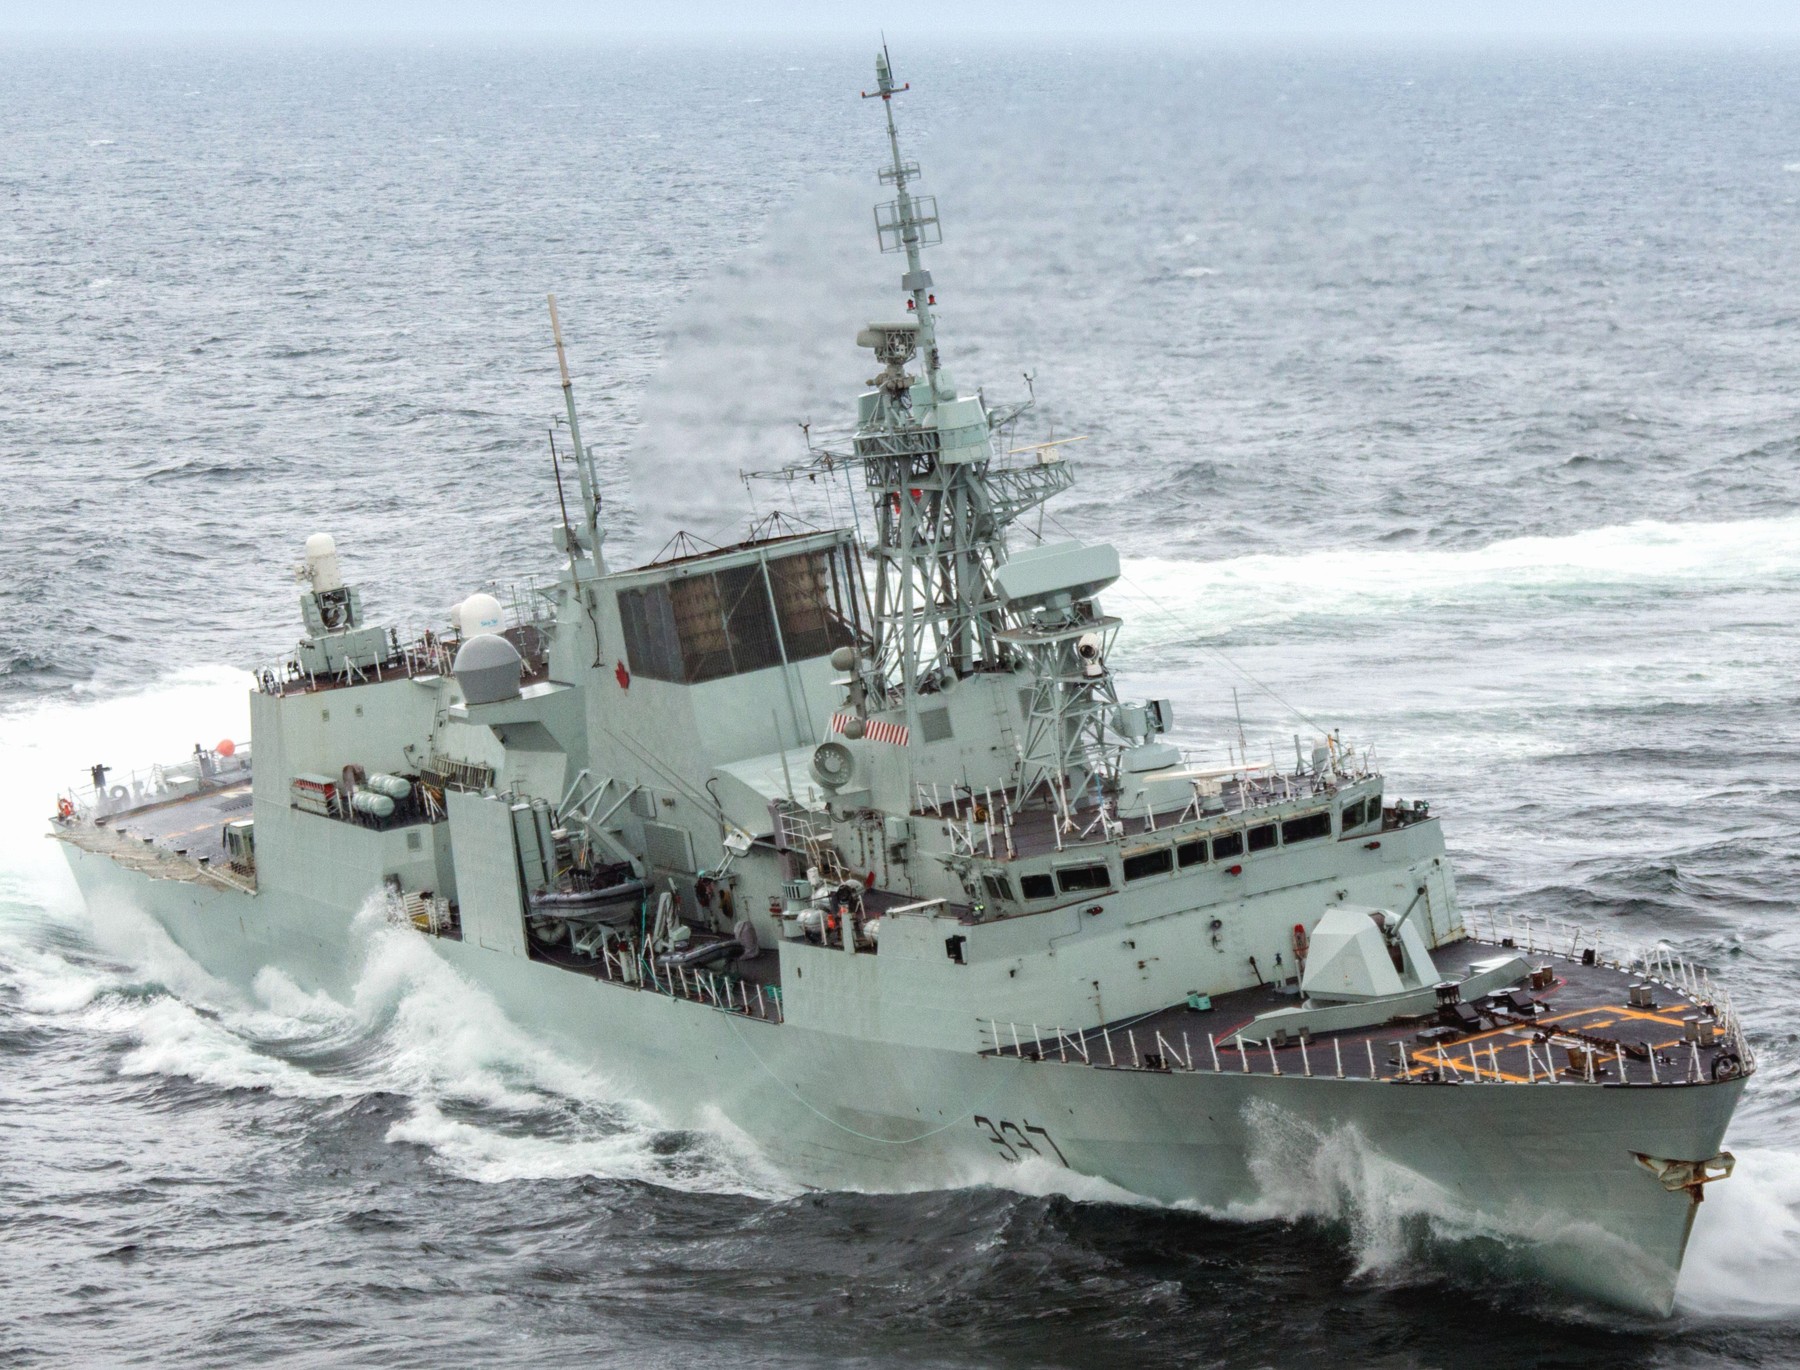 ffh-337 hmcs fredericton halifax class helicopter patrol frigate ncsm royal canadian navy 32